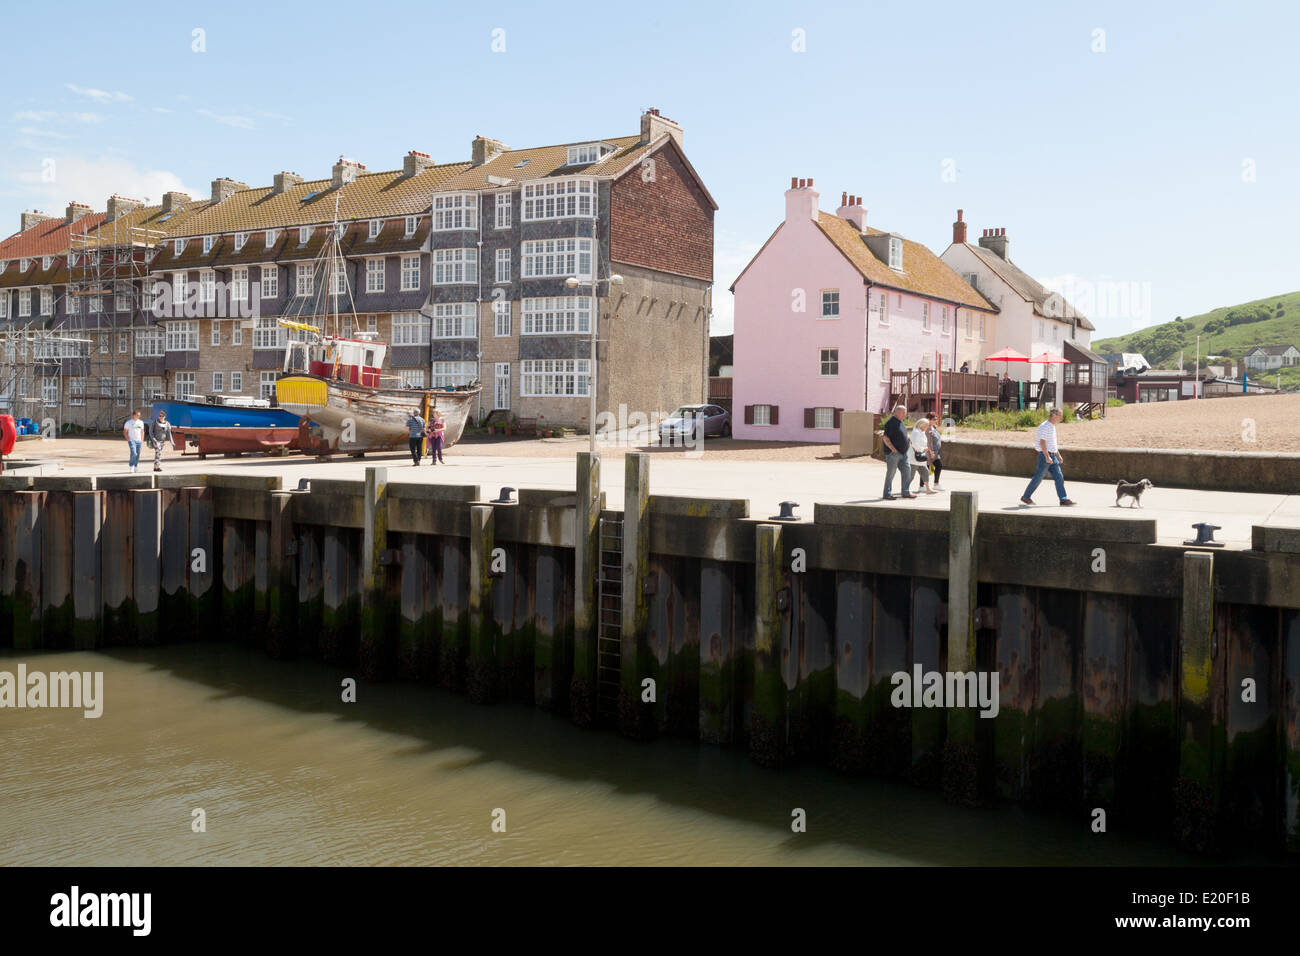 West Bay - buildings on the quay, and people walking, Bridport Harbour, Dorset coast path, Dorset England UK Stock Photo